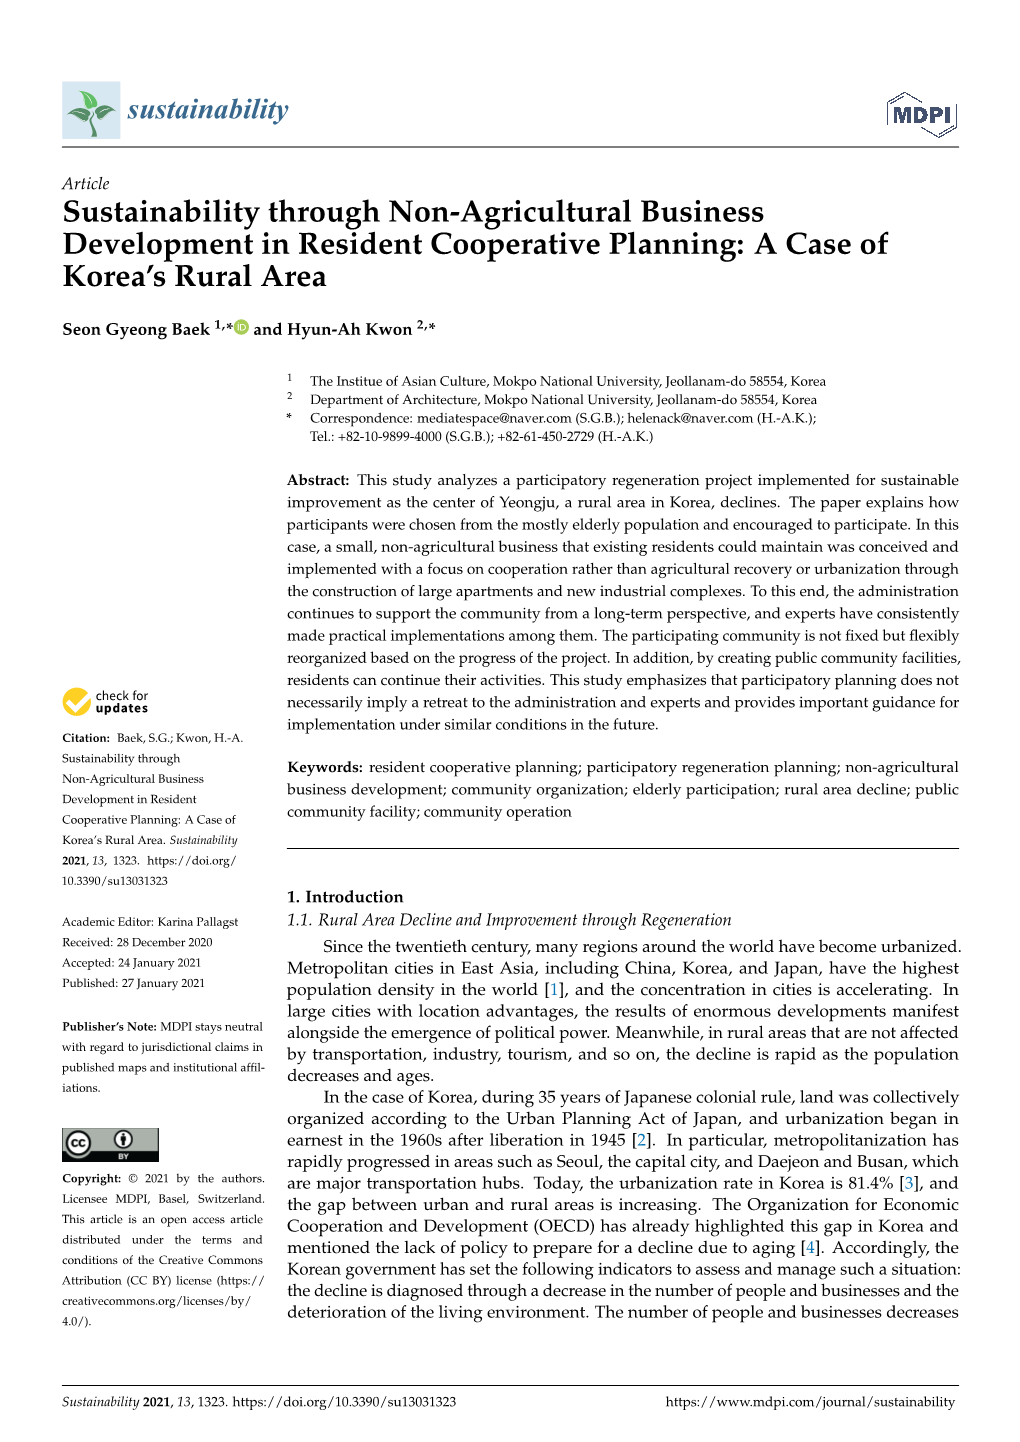 Sustainability Through Non-Agricultural Business Development in Resident Cooperative Planning: a Case of Korea’S Rural Area